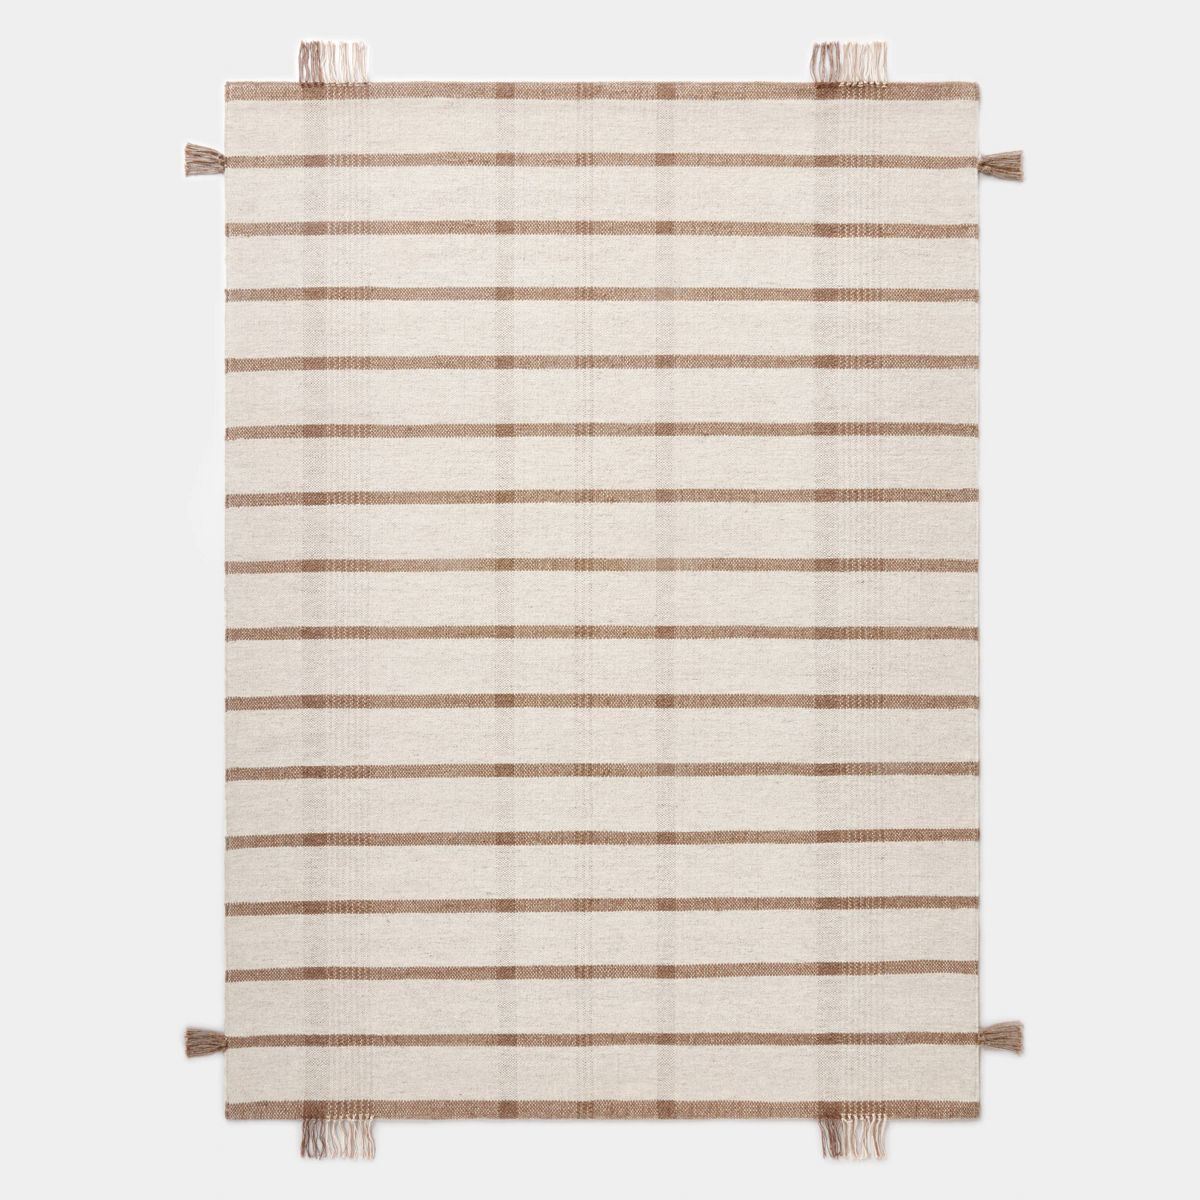 5'x7' Handwoven Plaid Flat Weave Area Rug Cream/Brown - Threshold™ designed with Studio McGee | Target